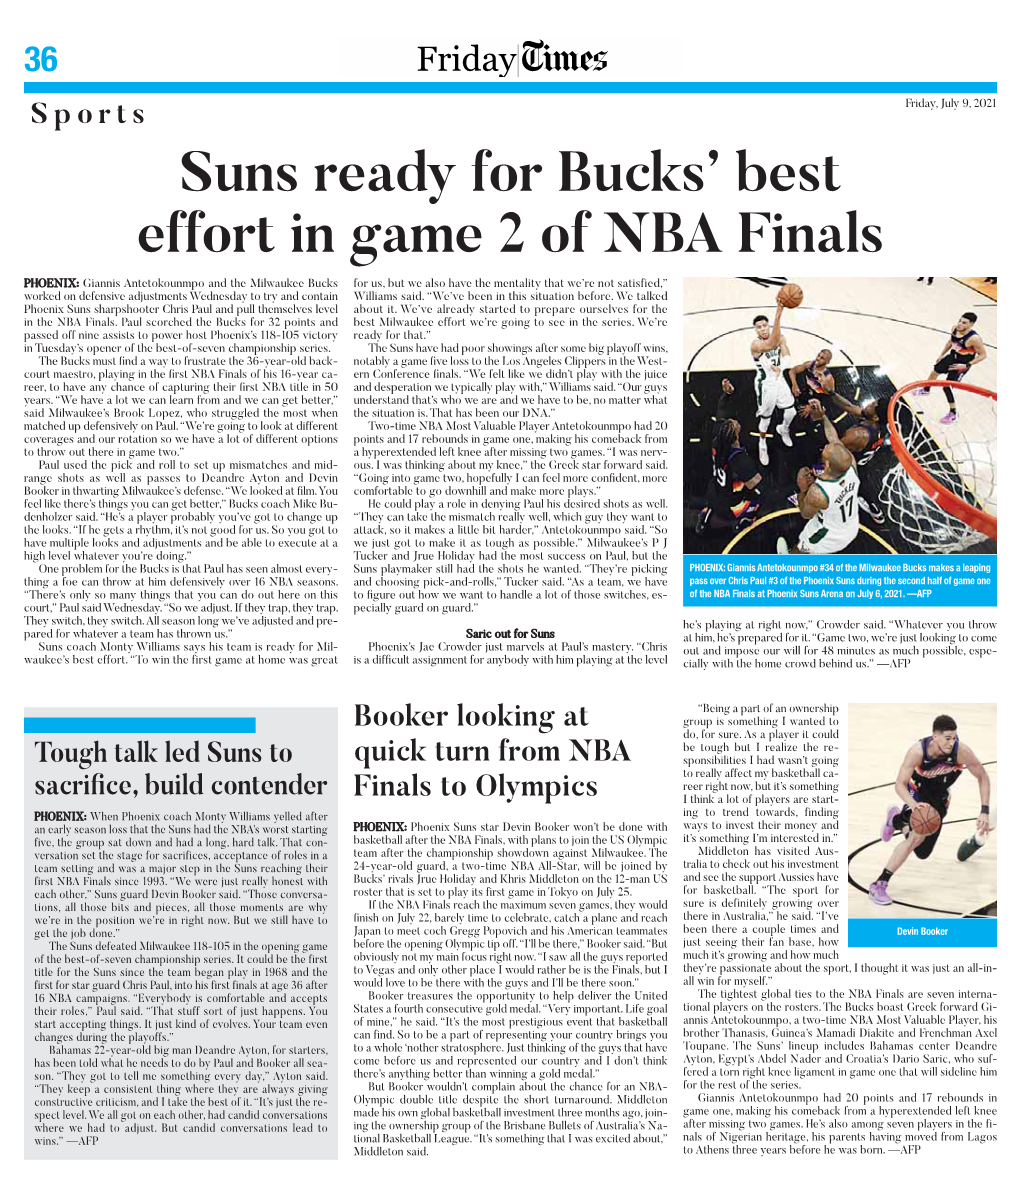 Suns Ready for Bucks' Best Effort in Game 2 of NBA Finals